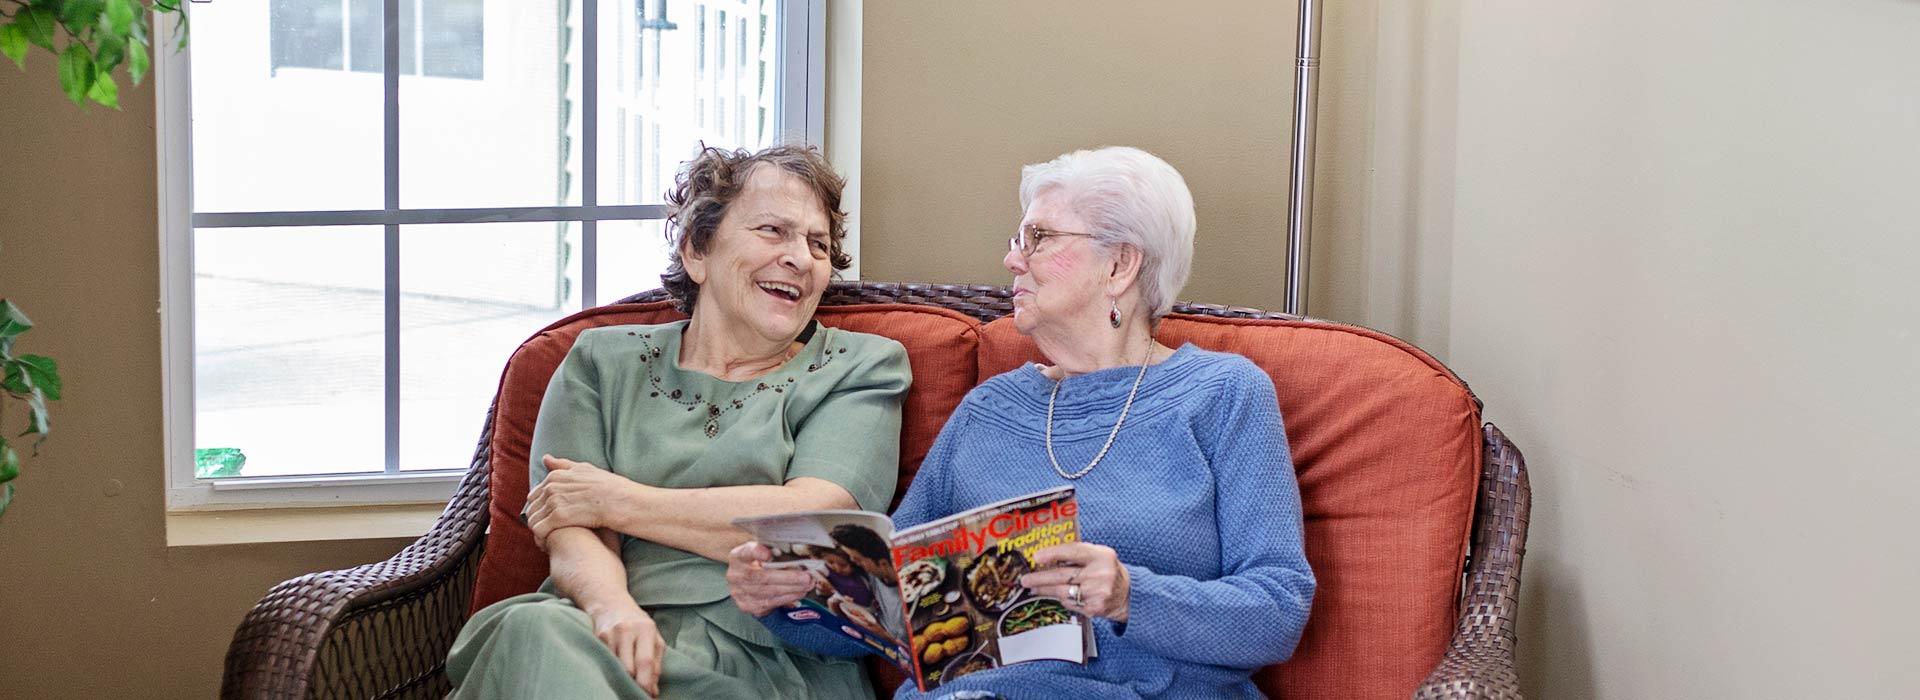 Two memory care patients socializing over a magazine